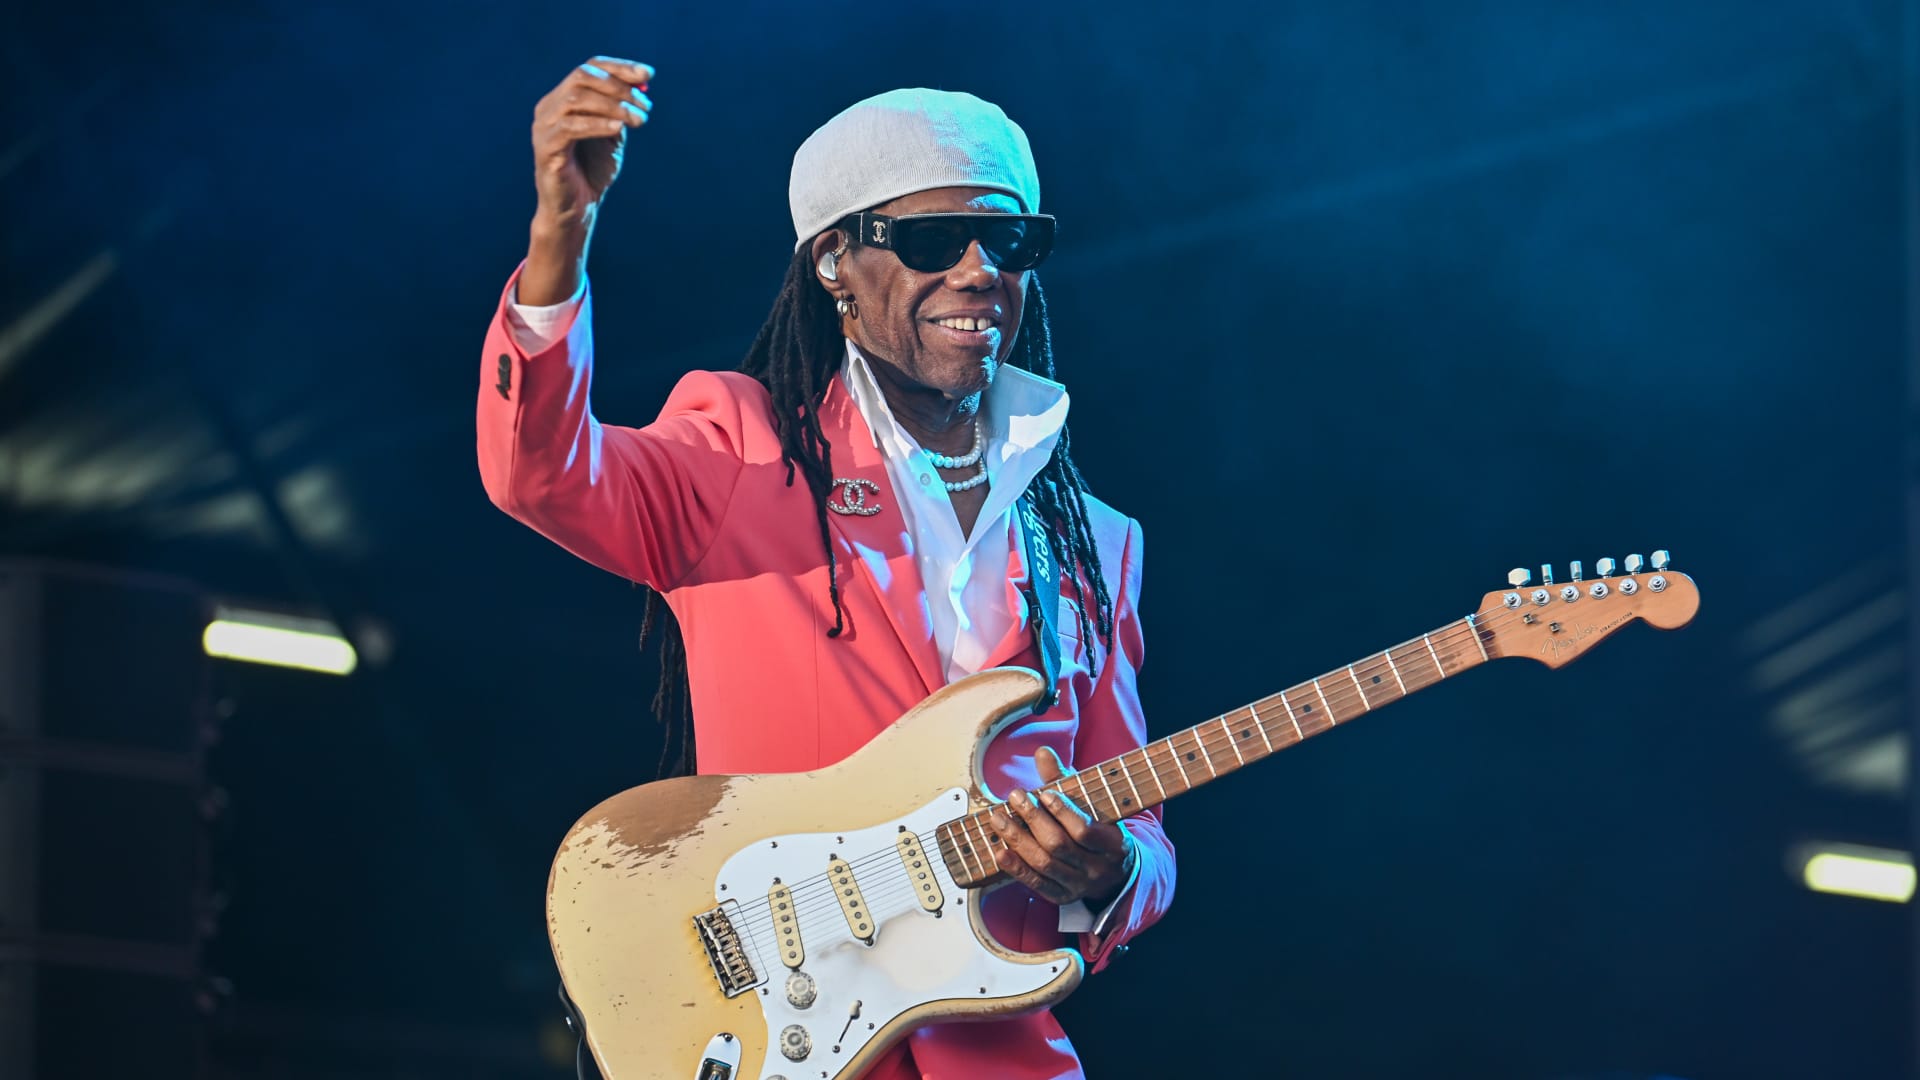 Nile Rodgers from the band Nile Rodgers & Chic performs at Harvest Rock 2023 on October 28, 2023 in Adelaide, Australia.